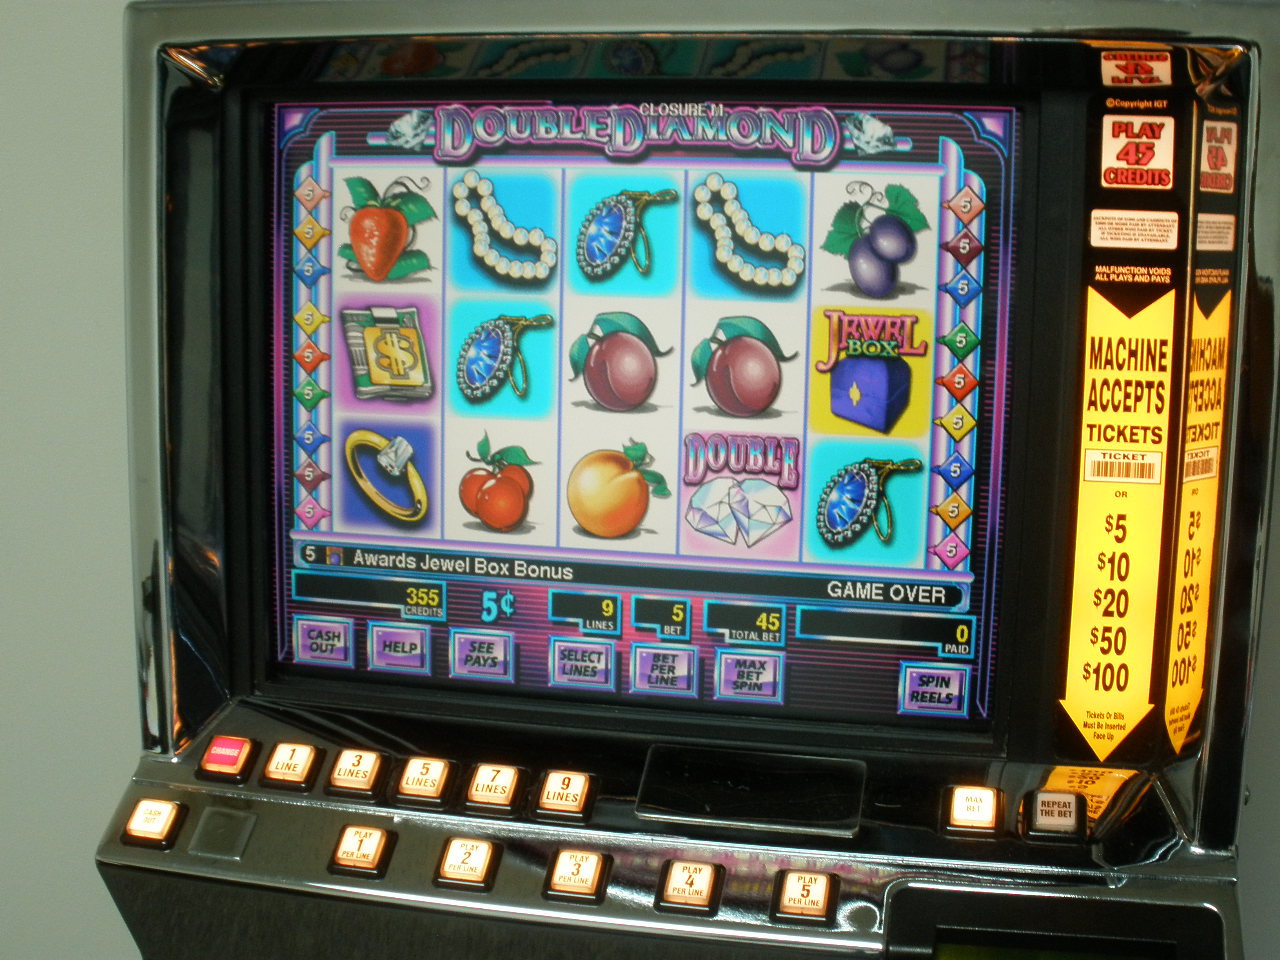 igt double gold slot machine